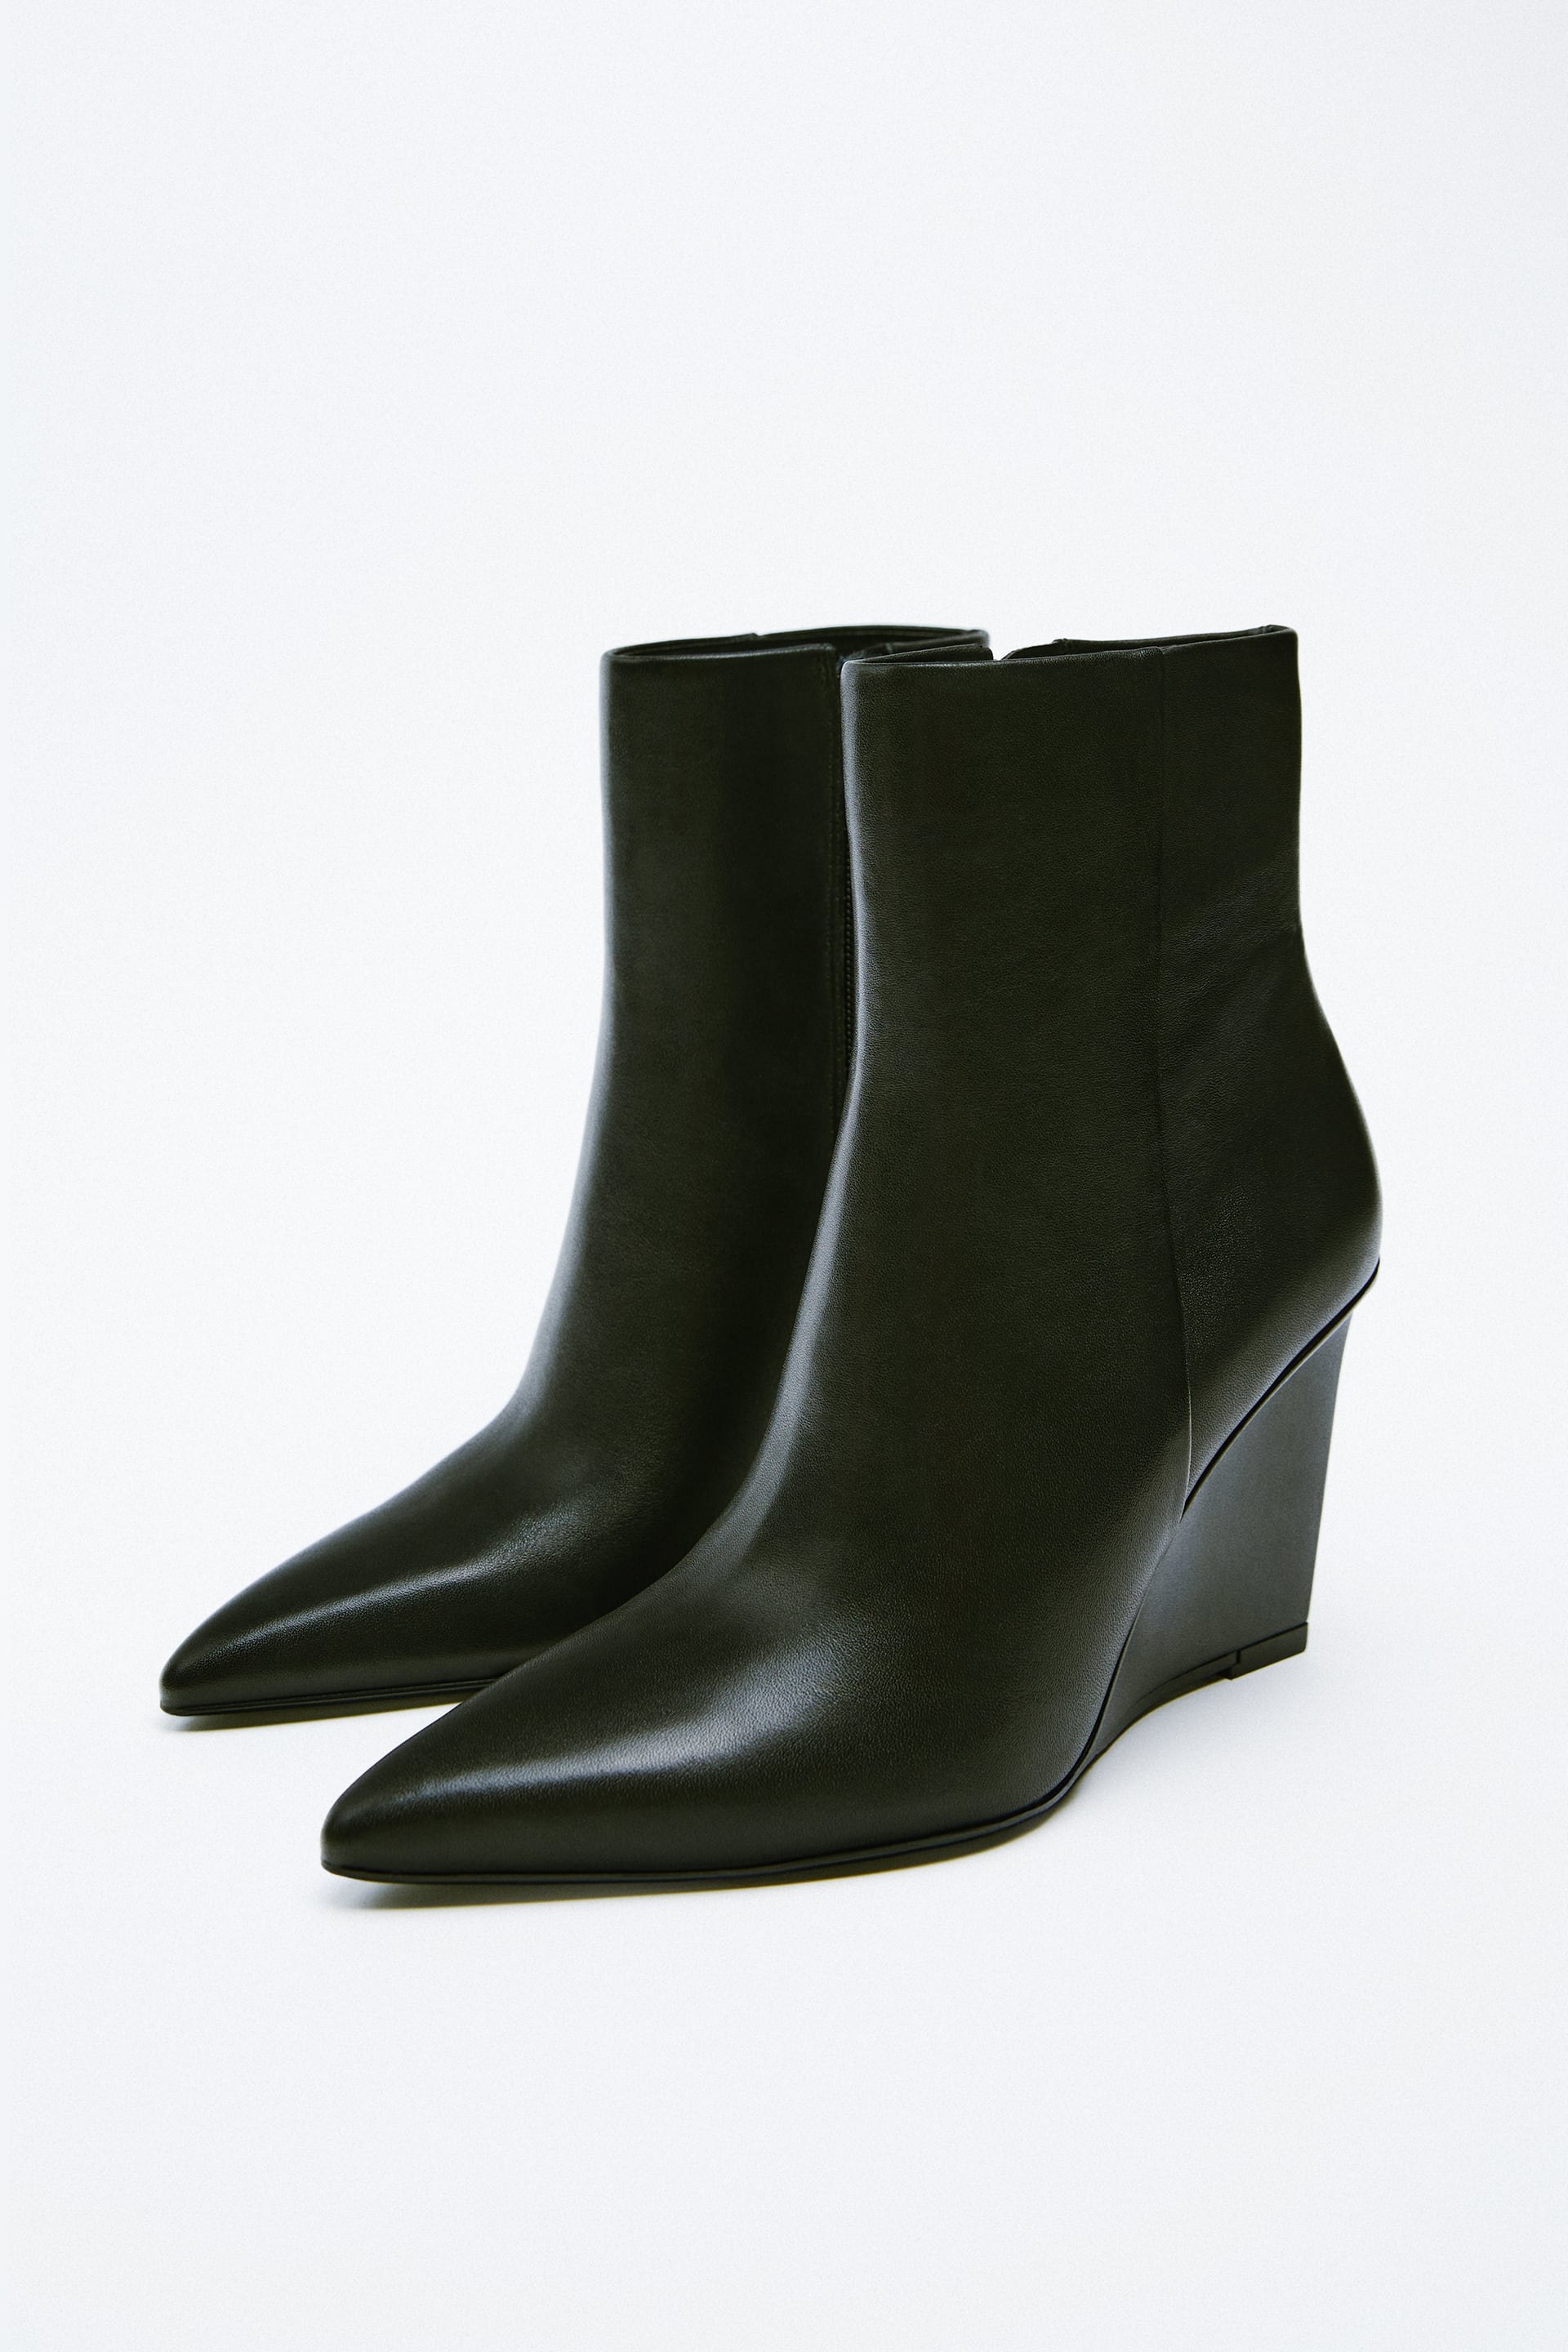 Zara LEATHER WEDGE ANKLE BOOTS - 147739114-040-